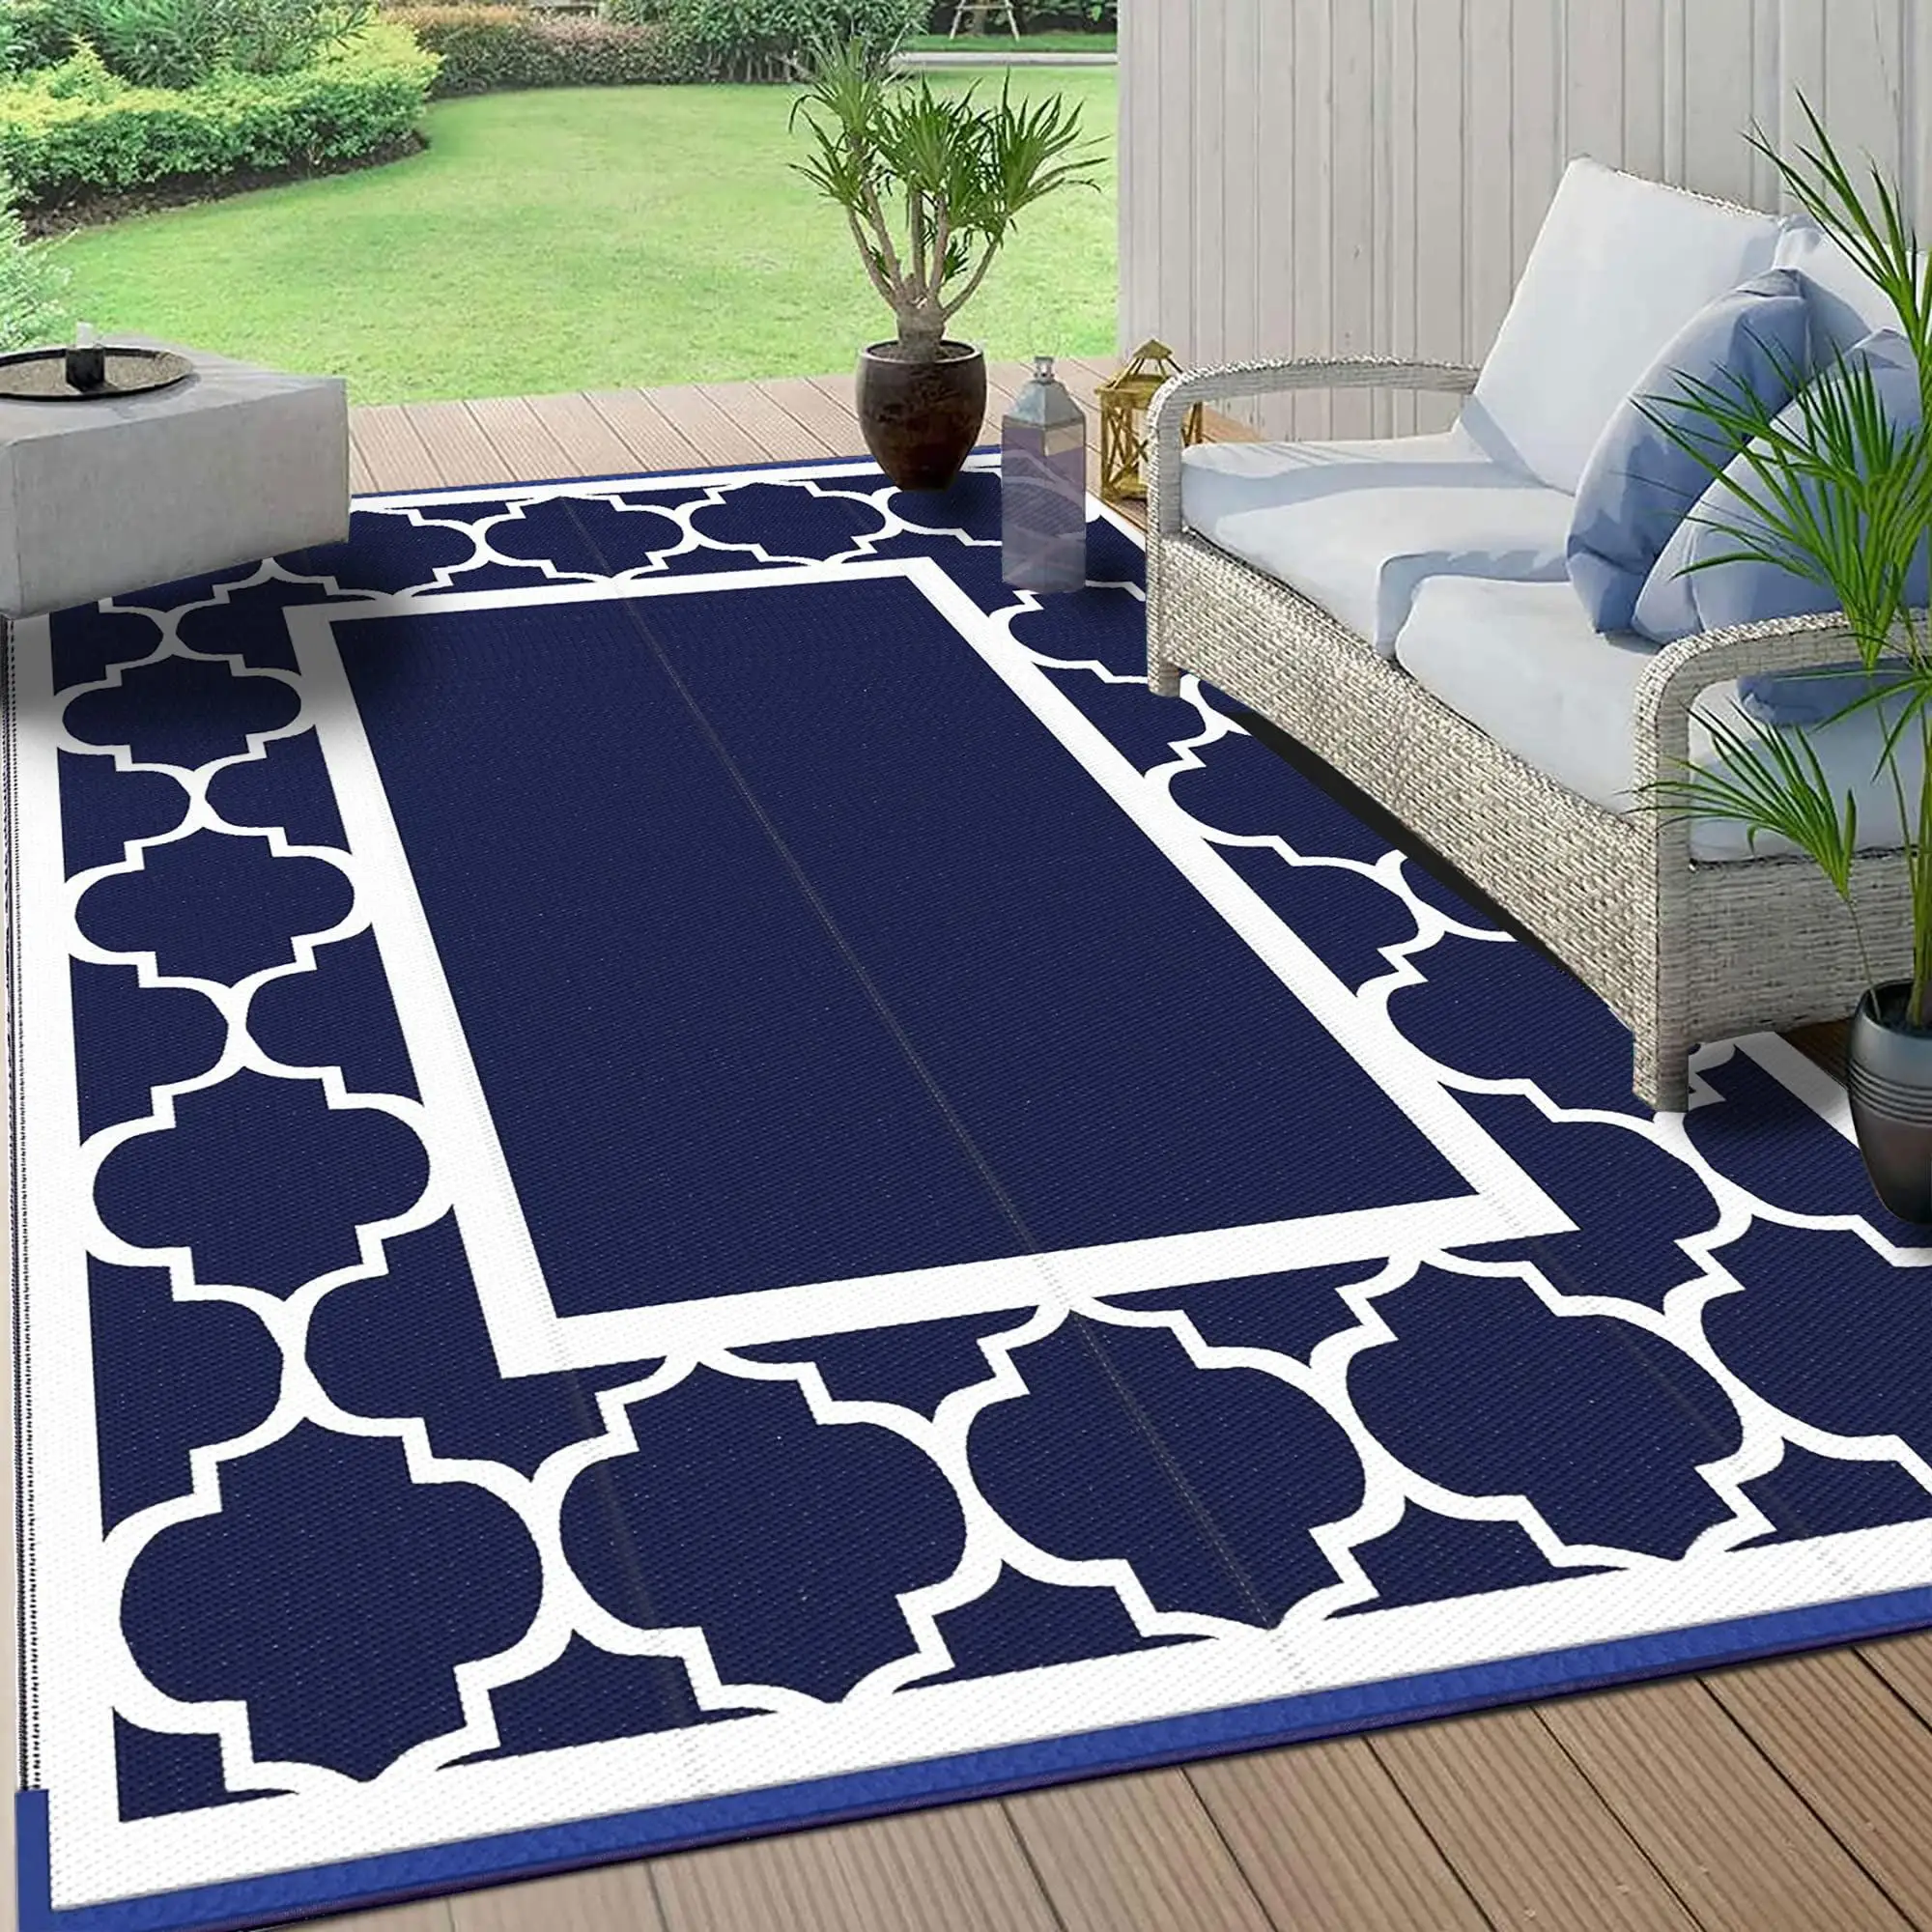 

9'x12' Outdoor Rug for Patio Clearance,Reversible Straw Plastic Waterproof Area Rugs,Clearance Mat, Camping, Deck, Porch, Camper